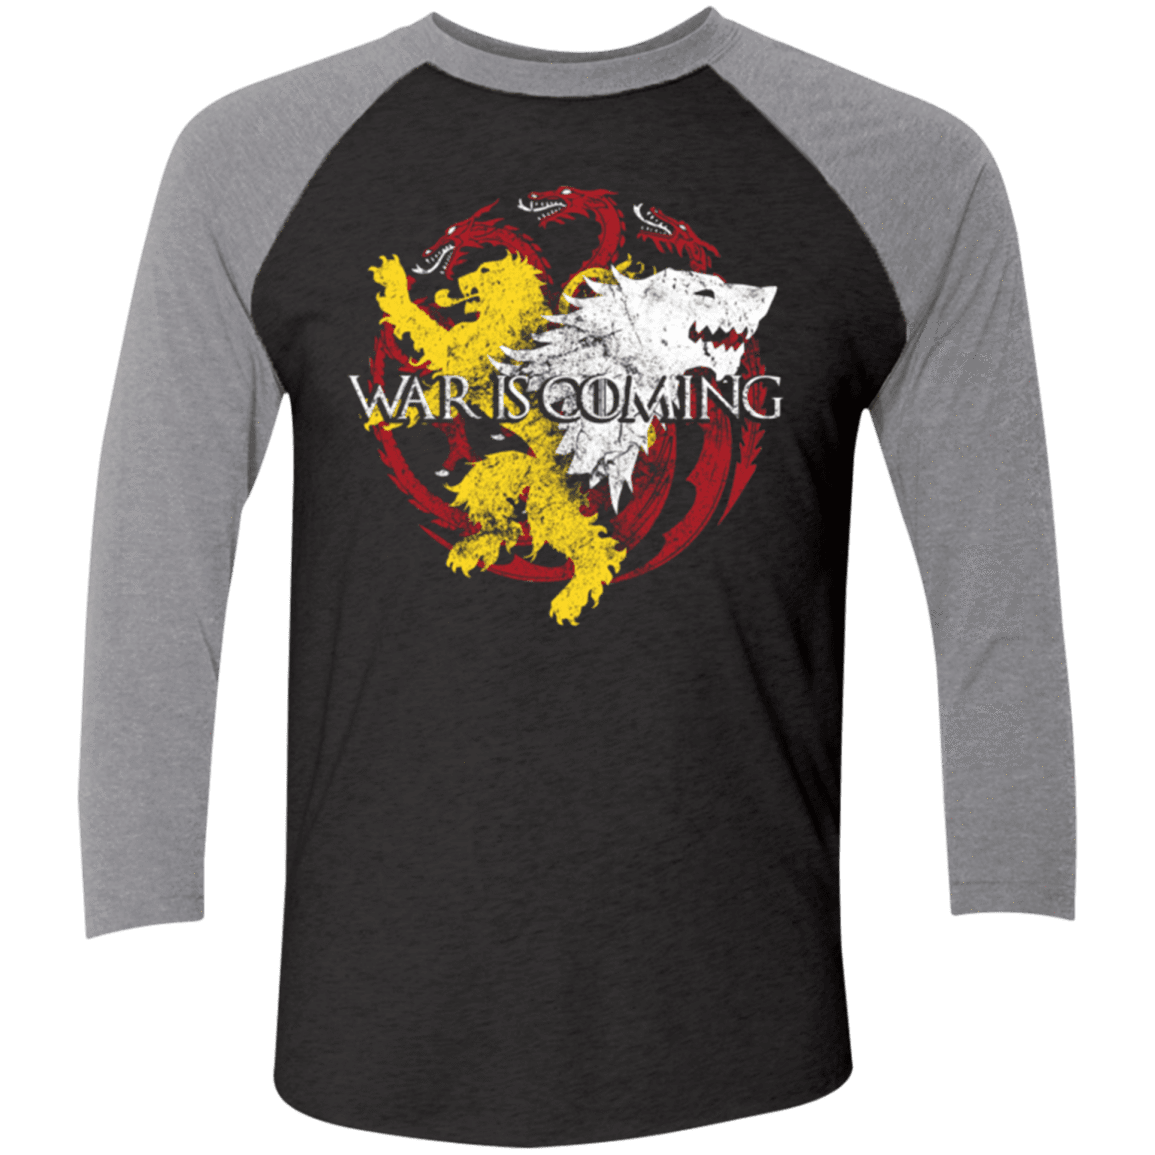 T-Shirts Vintage Black/Premium Heather / X-Small War is Coming Men's Triblend 3/4 Sleeve